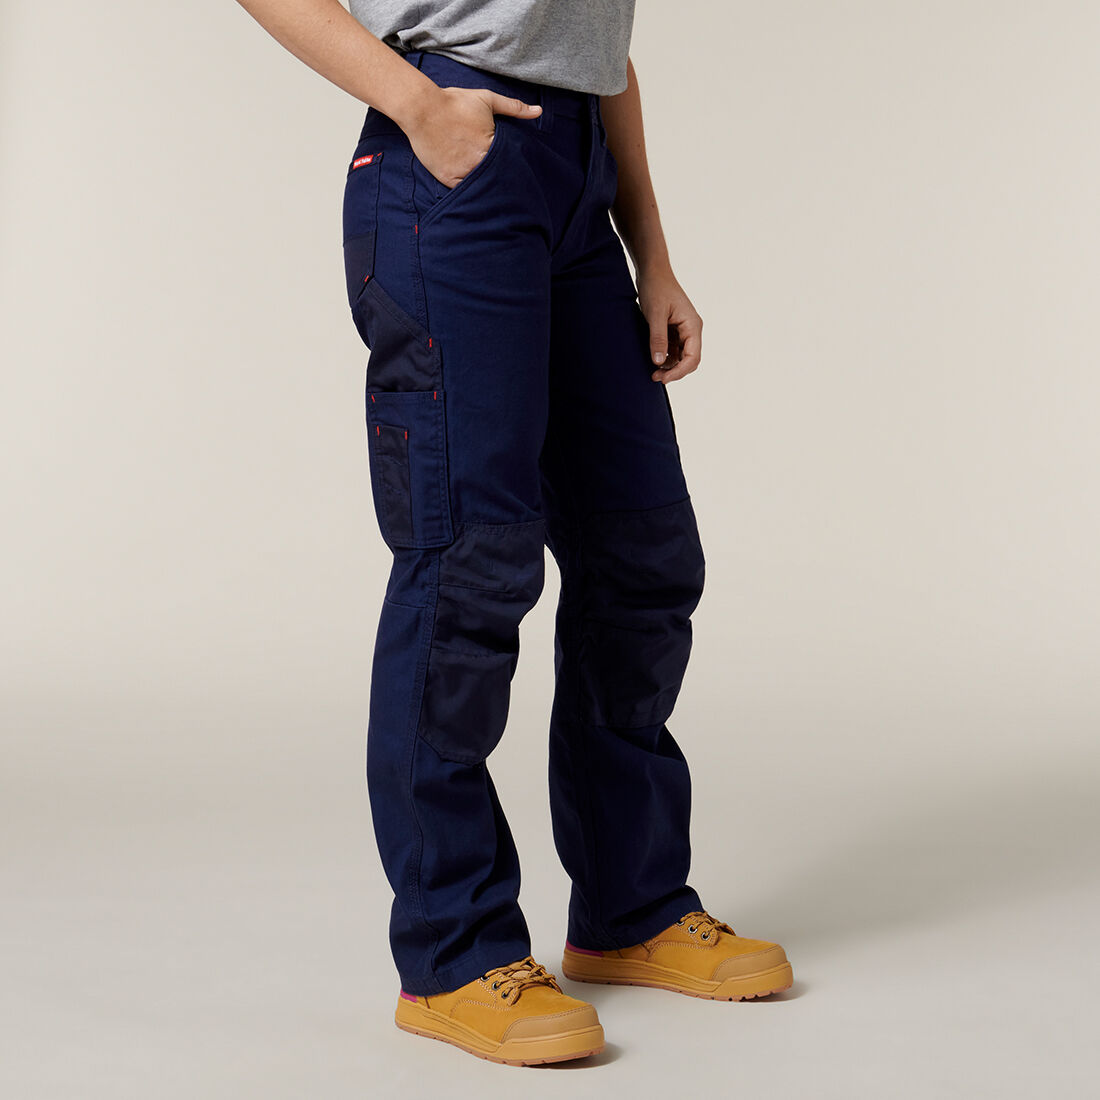 WP-3W FXD Womens Stretch Cotton Work Pants